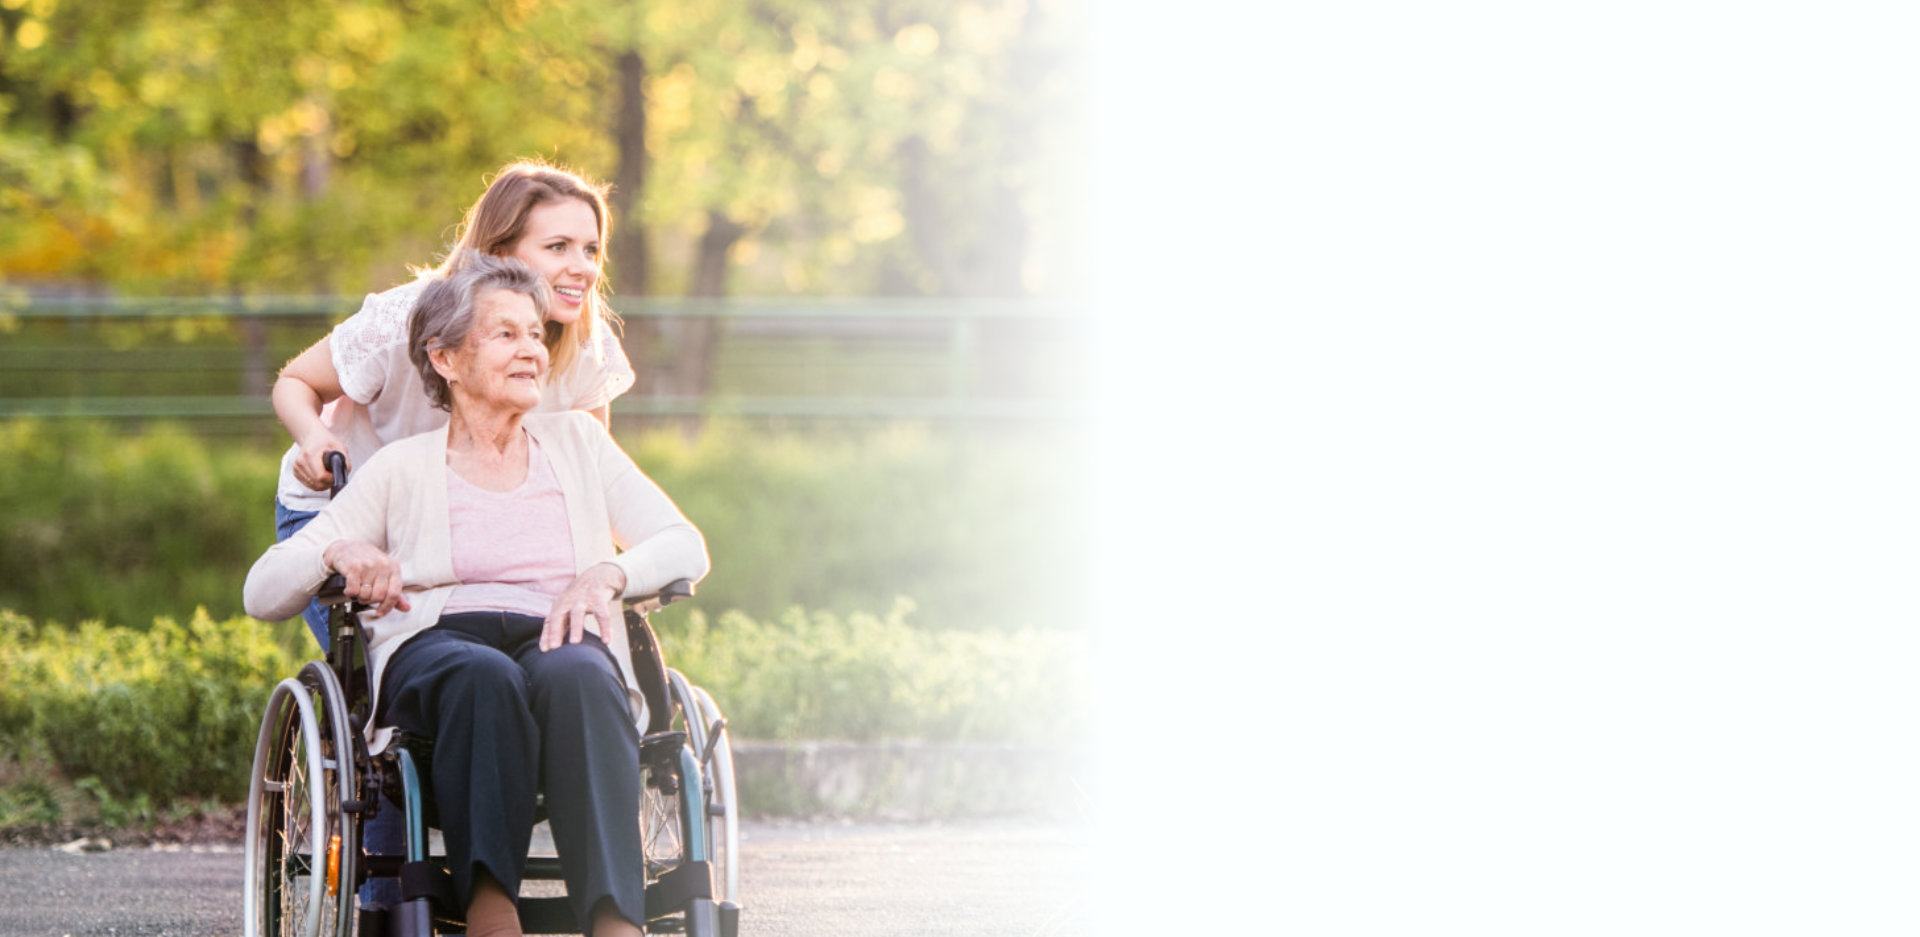 Elderly grandmother in wheelchair with granddaughter in spring nature.